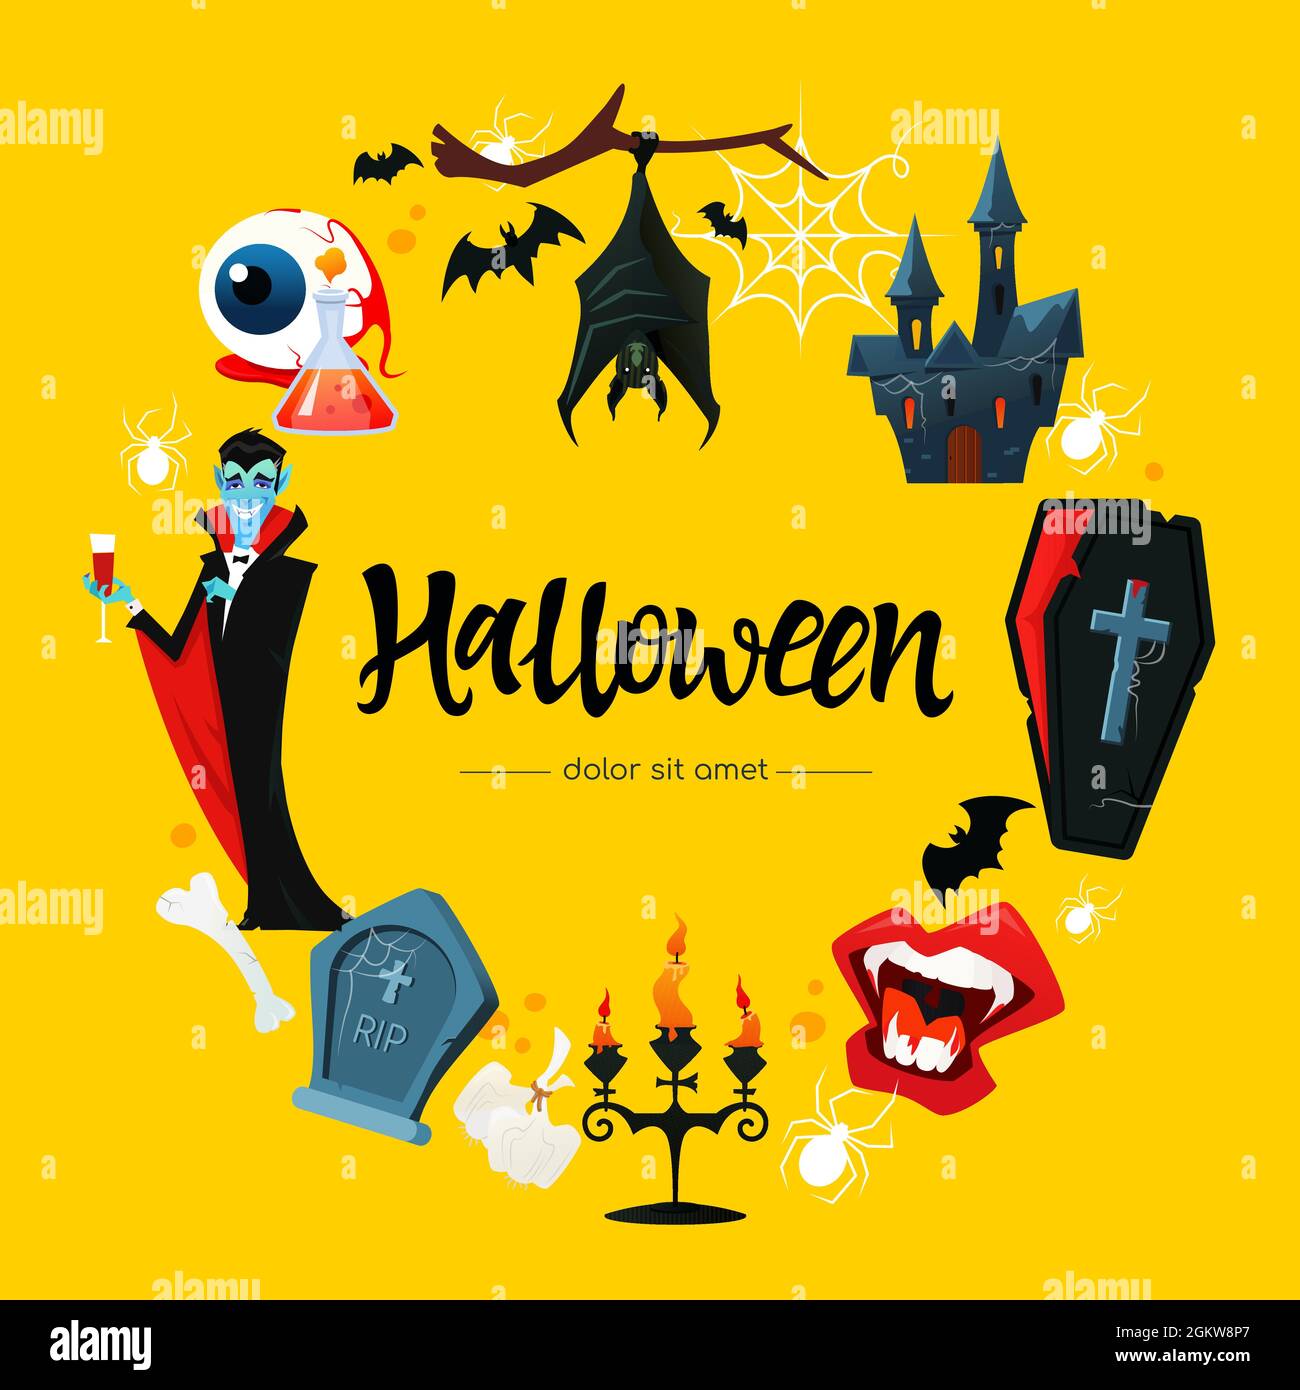 Halloween - modern cartoon style colored rounded illustration. Vampire aesthetics. Dracula, bats, old stone castle, open coffin, bloody fangs, candles Stock Vector